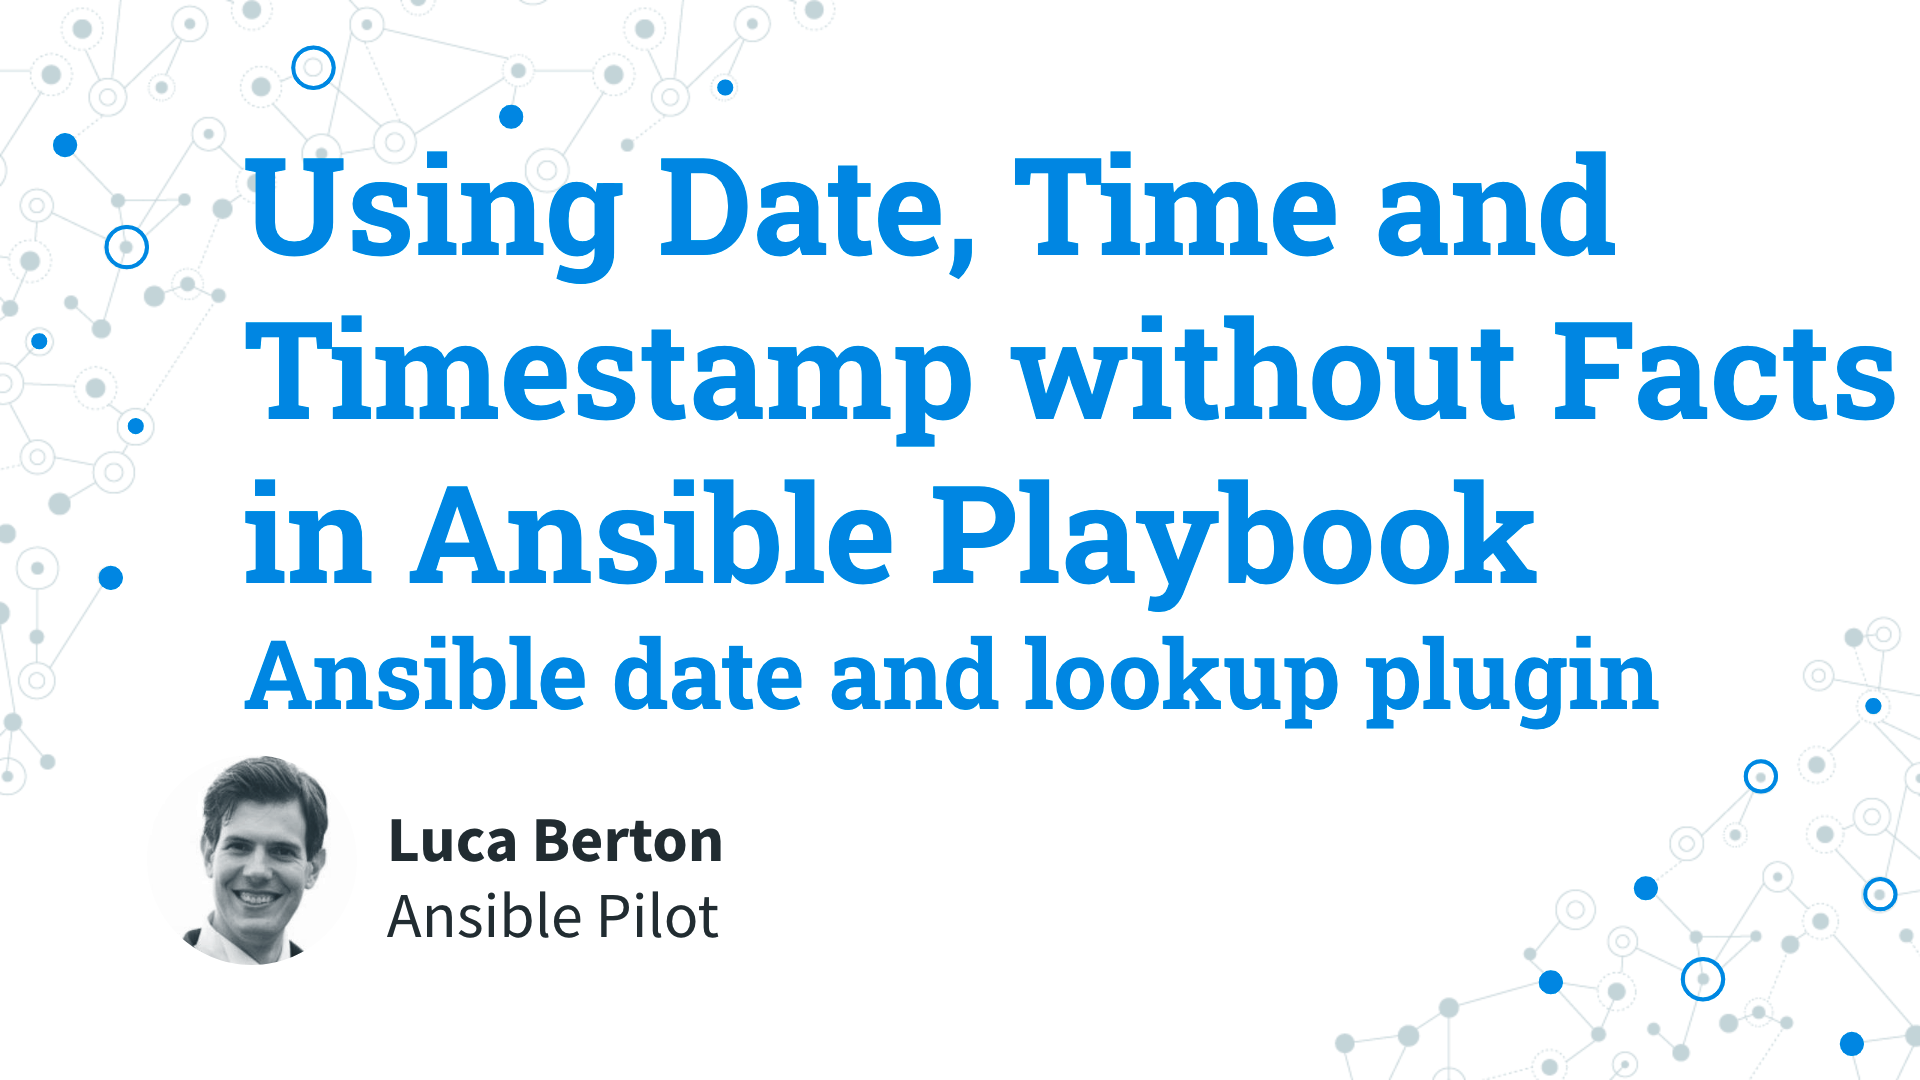 Using Date, Time and Timestamp without Facts in Ansible Playbook - Ansible date and lookup plugin